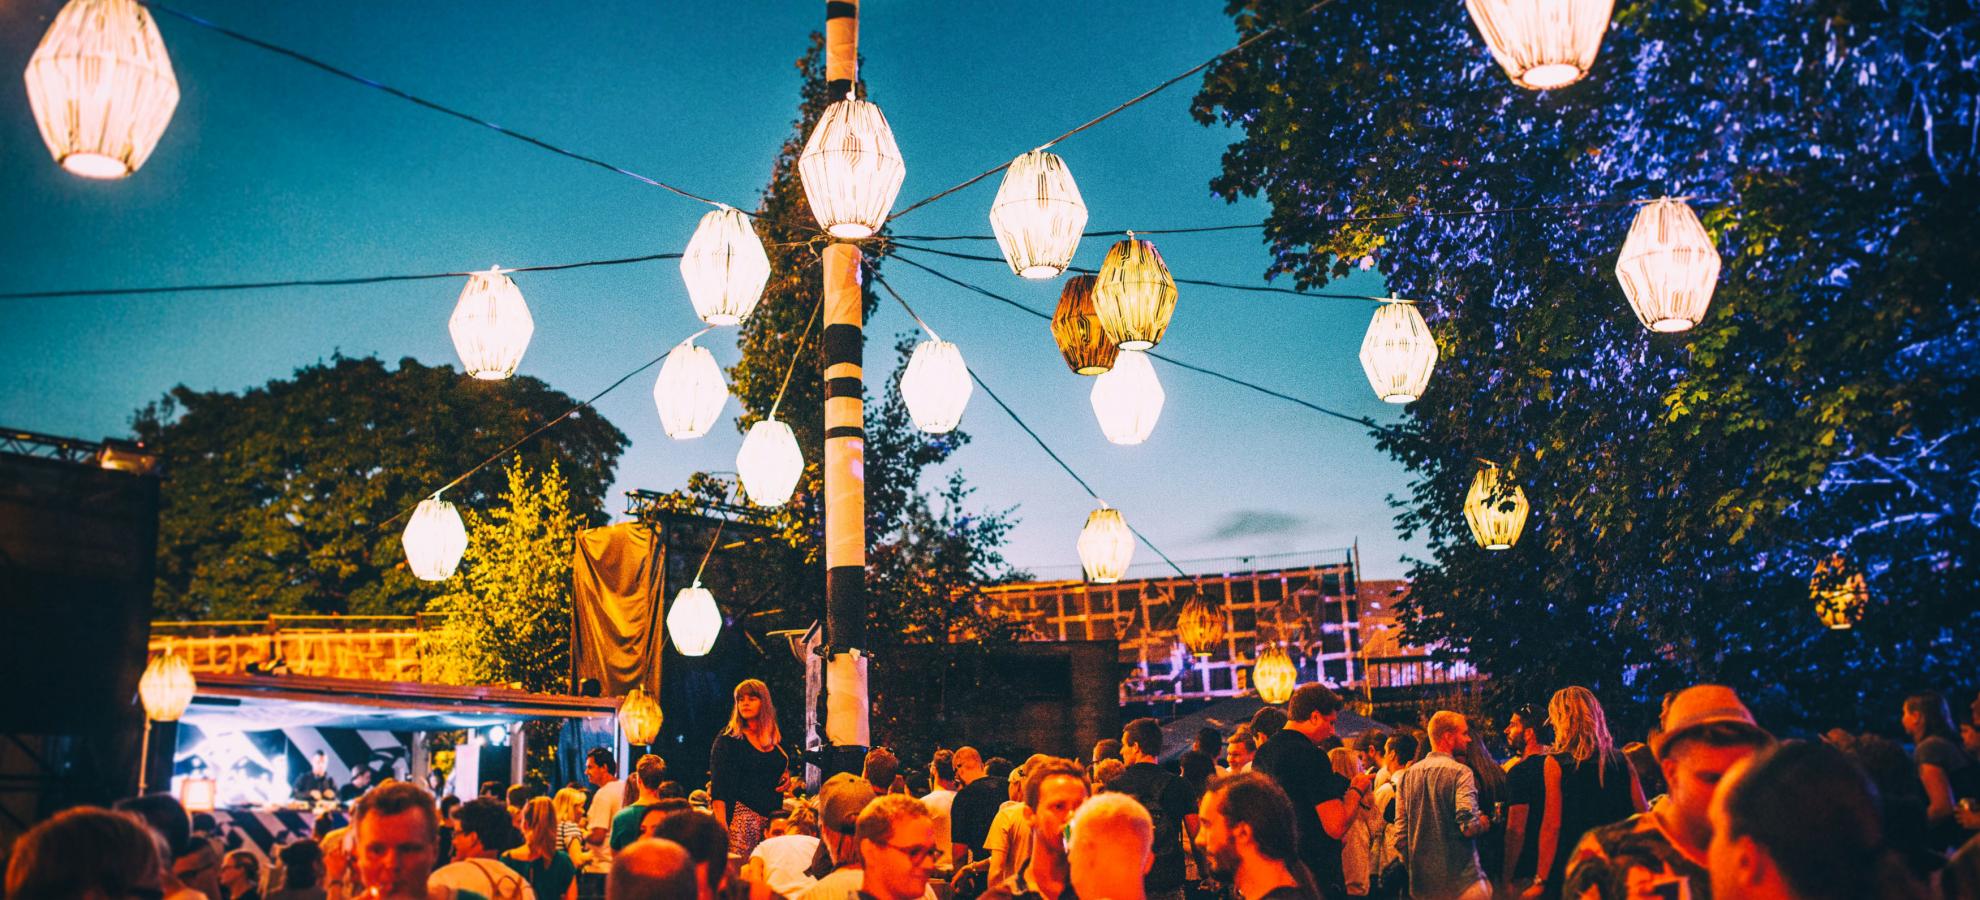 Large crowds gather during the evening at Flow Festival underneath dozens of paper lamps. A few large trees surround the area under a deep blue night's sky. 